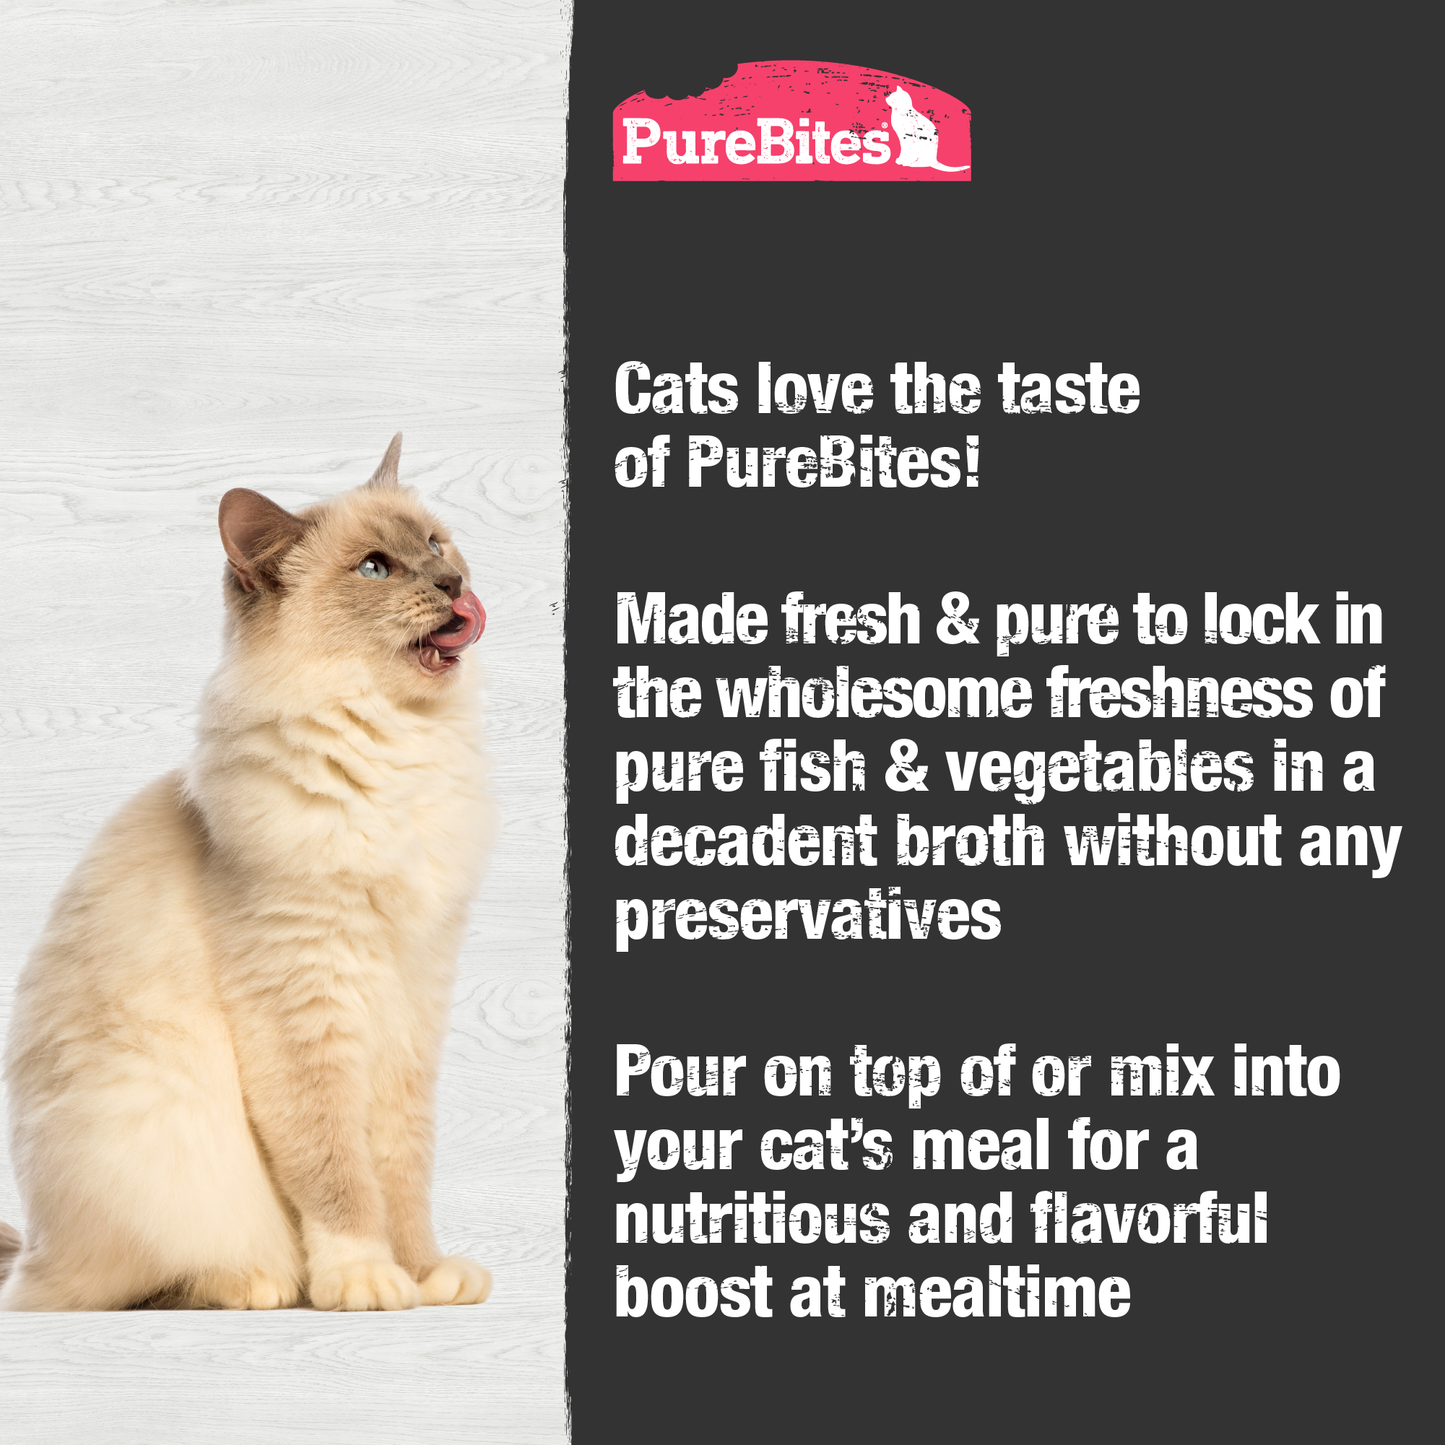 Made fresh & pure means more protein and nutrients packed into every pouch. With only tuna, shrimp, and vegetables in a rich broth, it provides superior nutrition and mirrors a cat's ancestral diet.